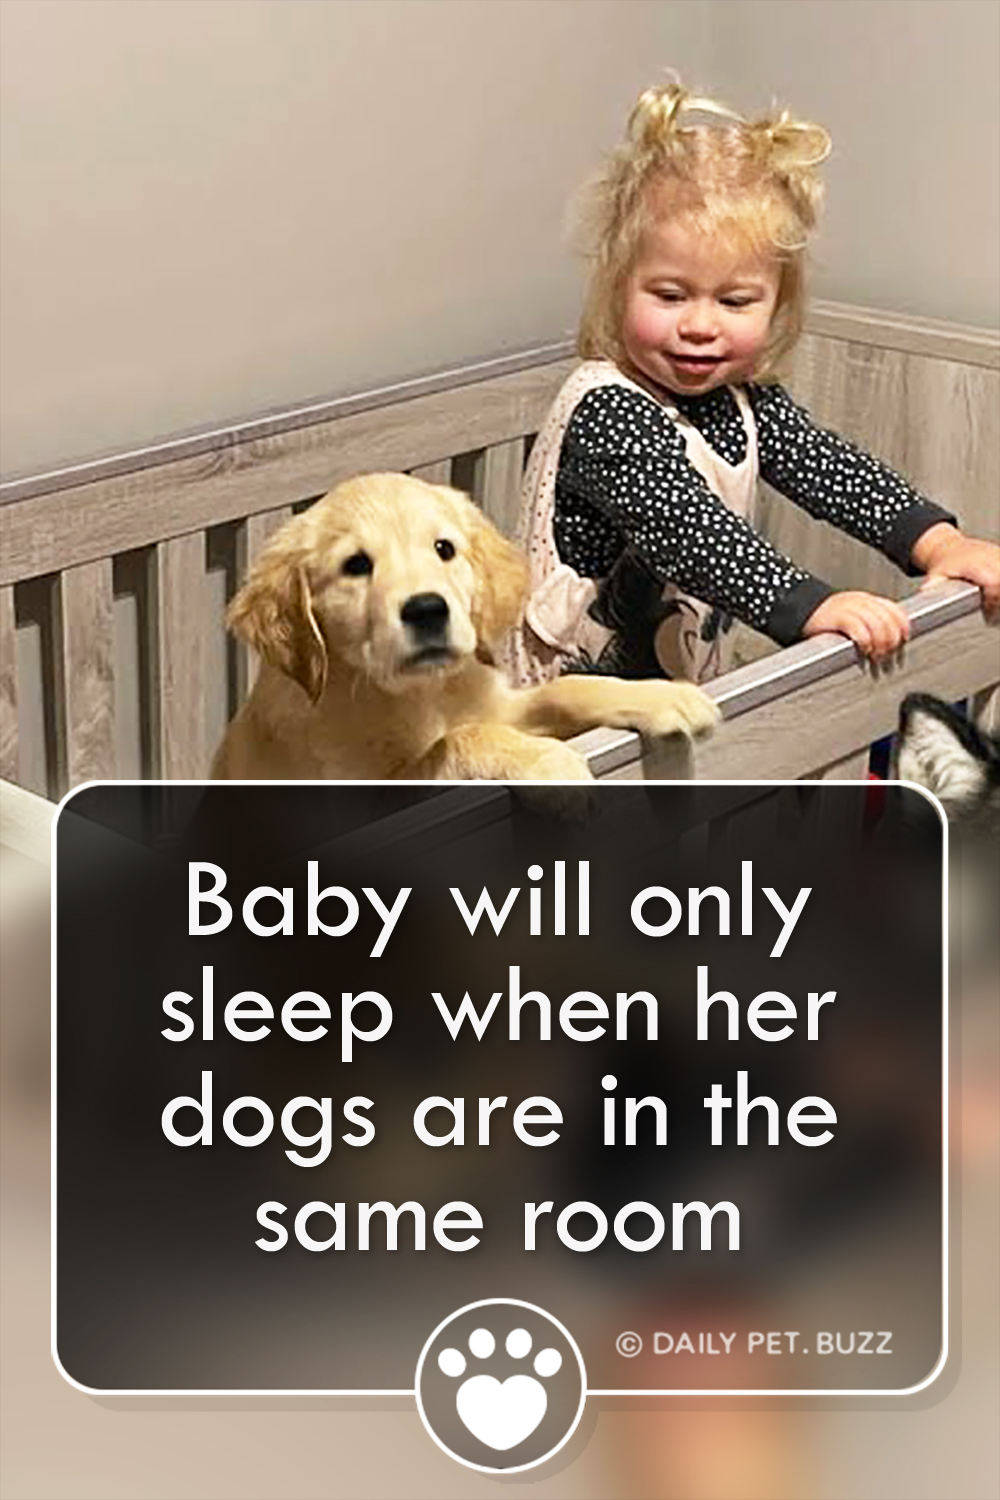 Baby will only sleep when her dogs are in the same room